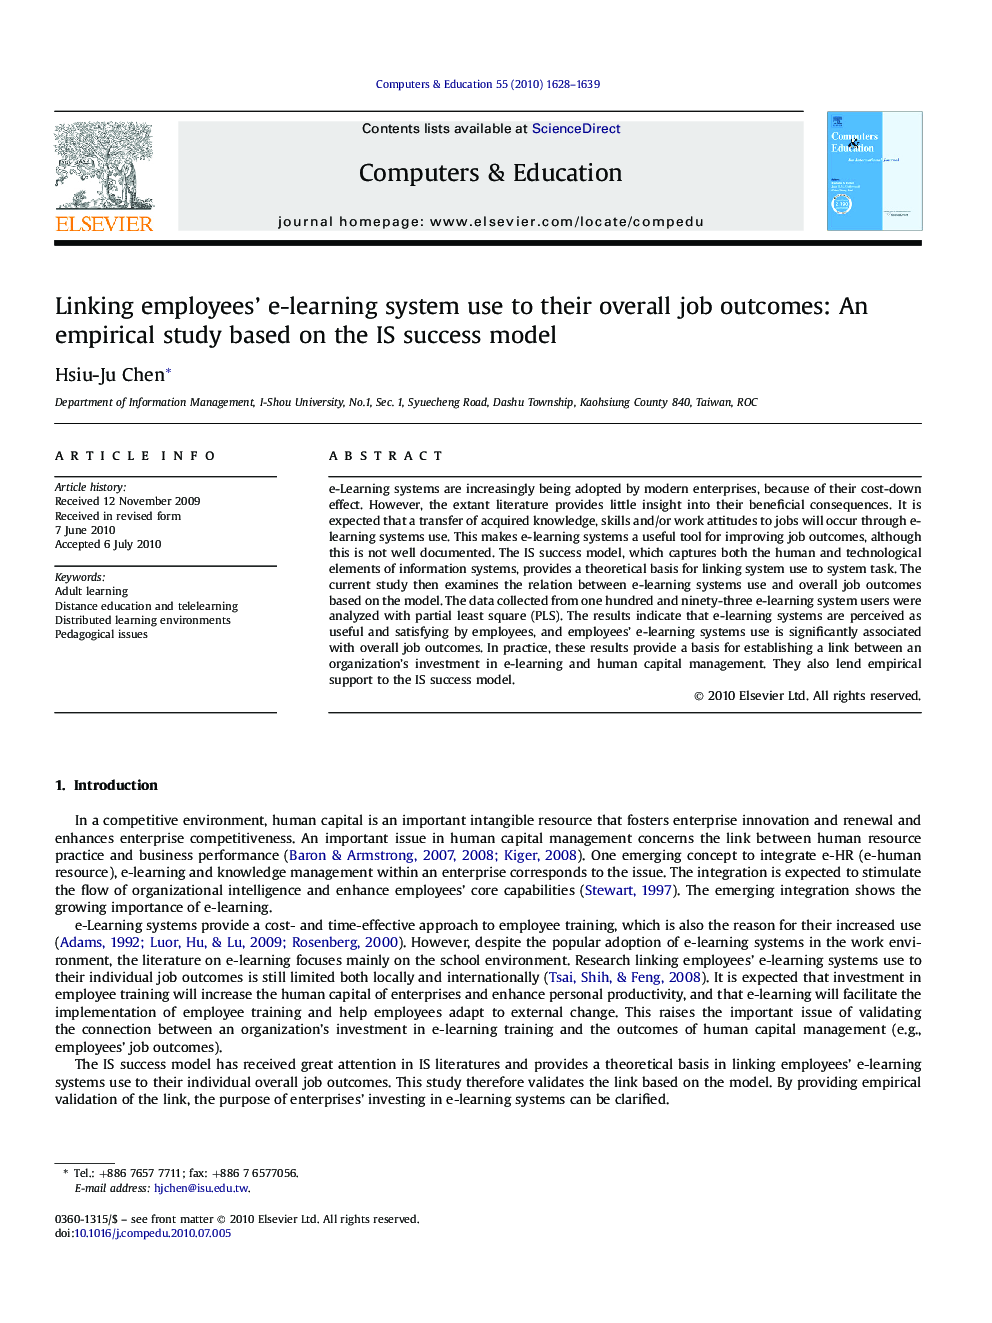 Linking employees’ e-learning system use to their overall job outcomes: An empirical study based on the IS success model